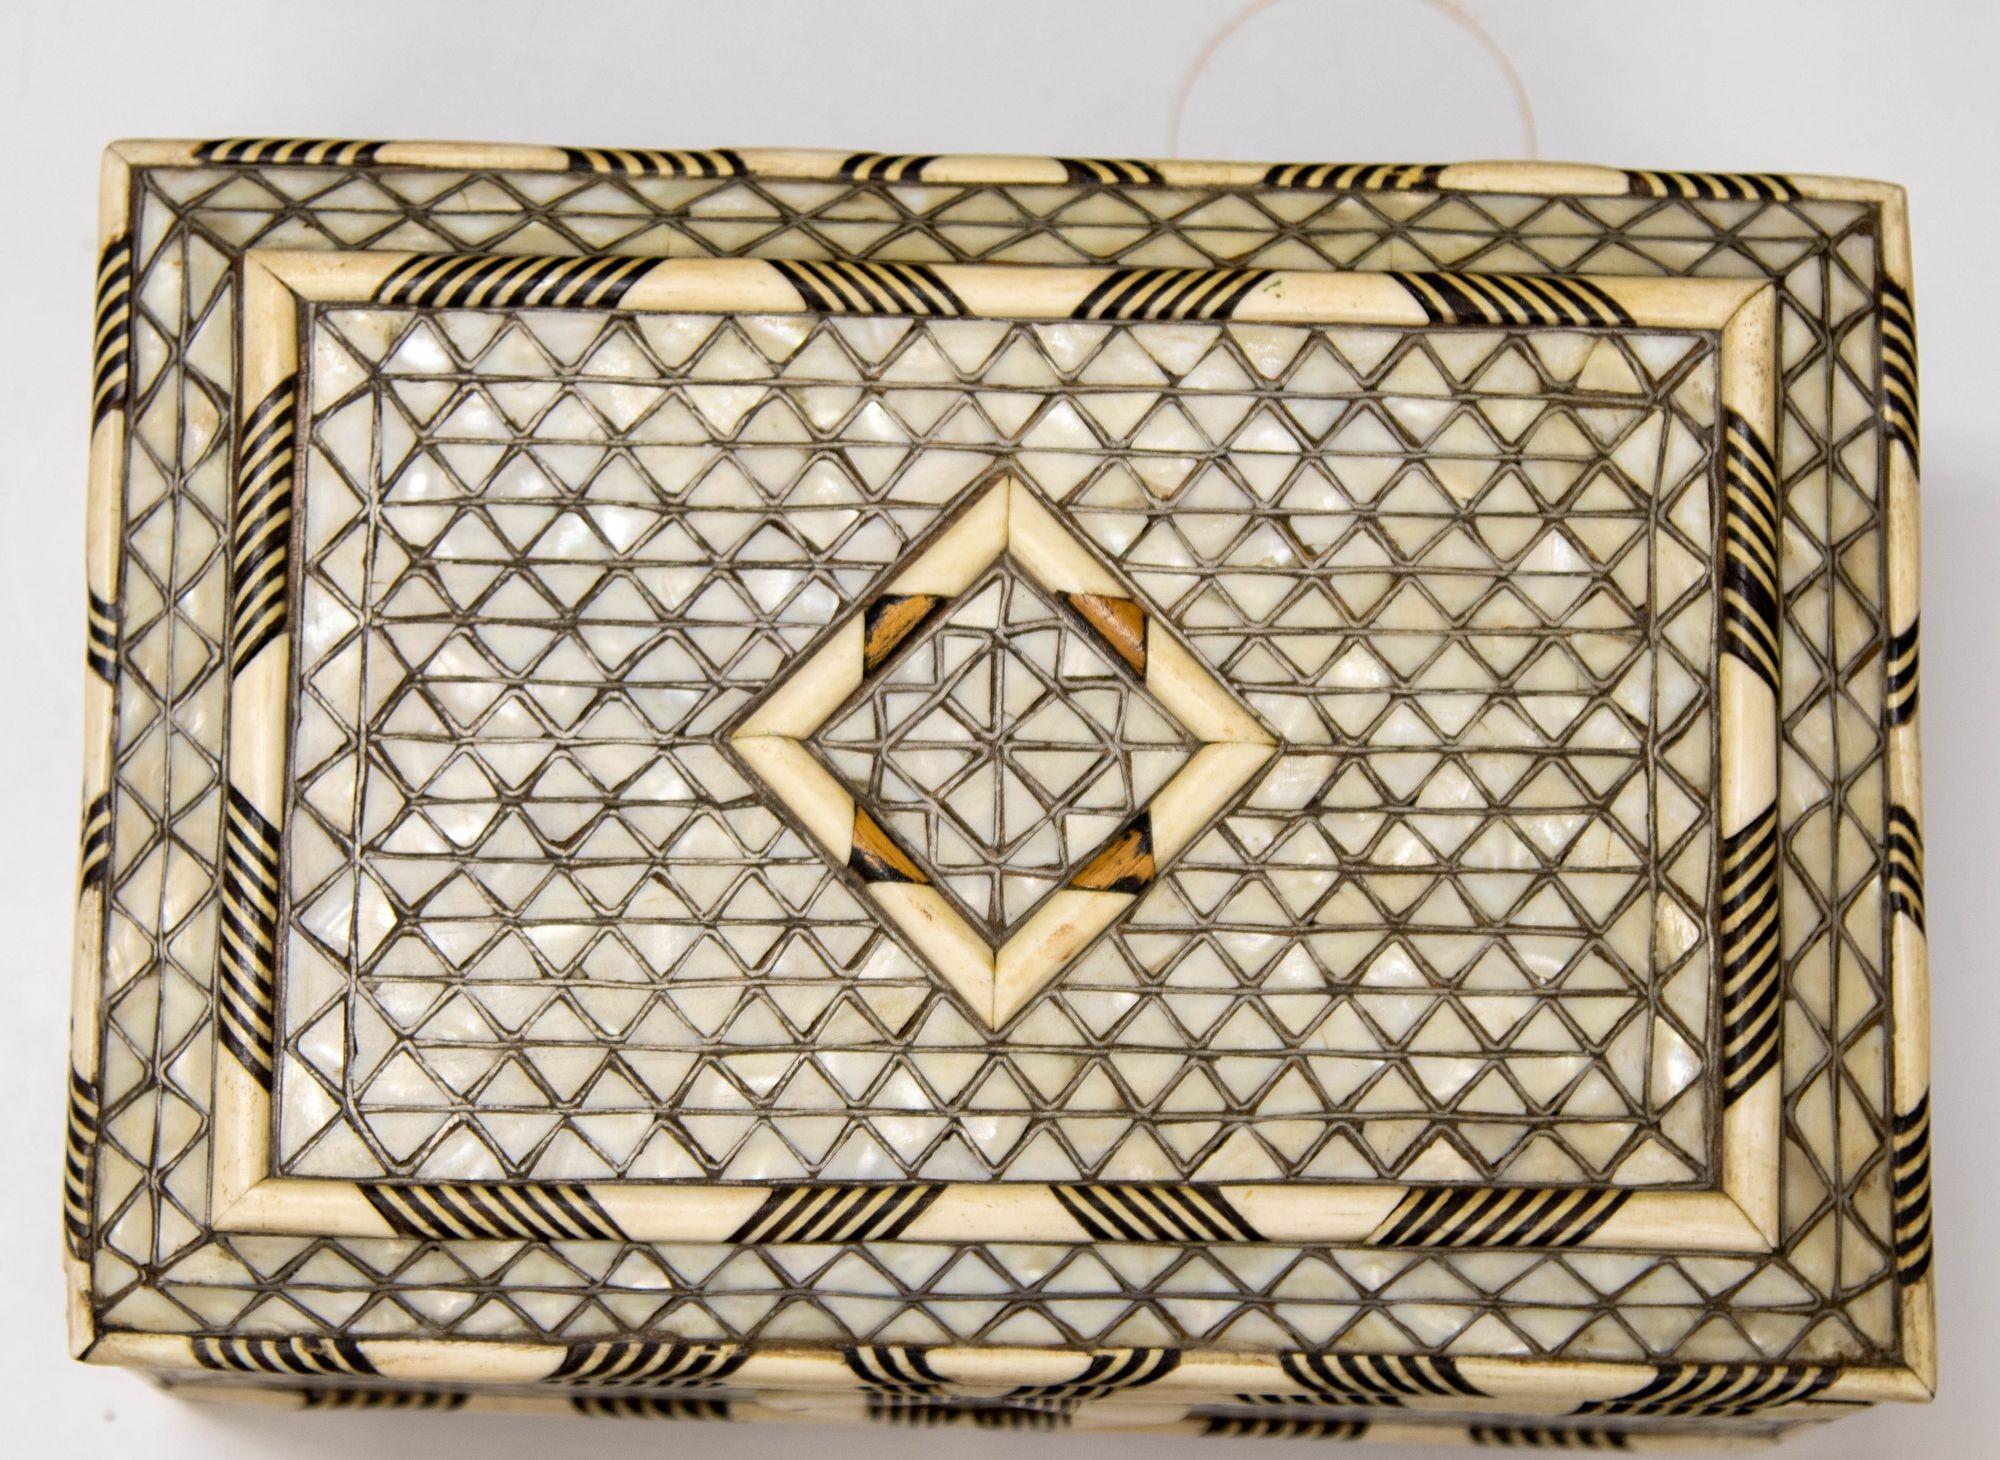 Turkish Mother of Pearl Mounted Syrian Ottoman Jewelry Box with Bone Inlay Casket 19th C